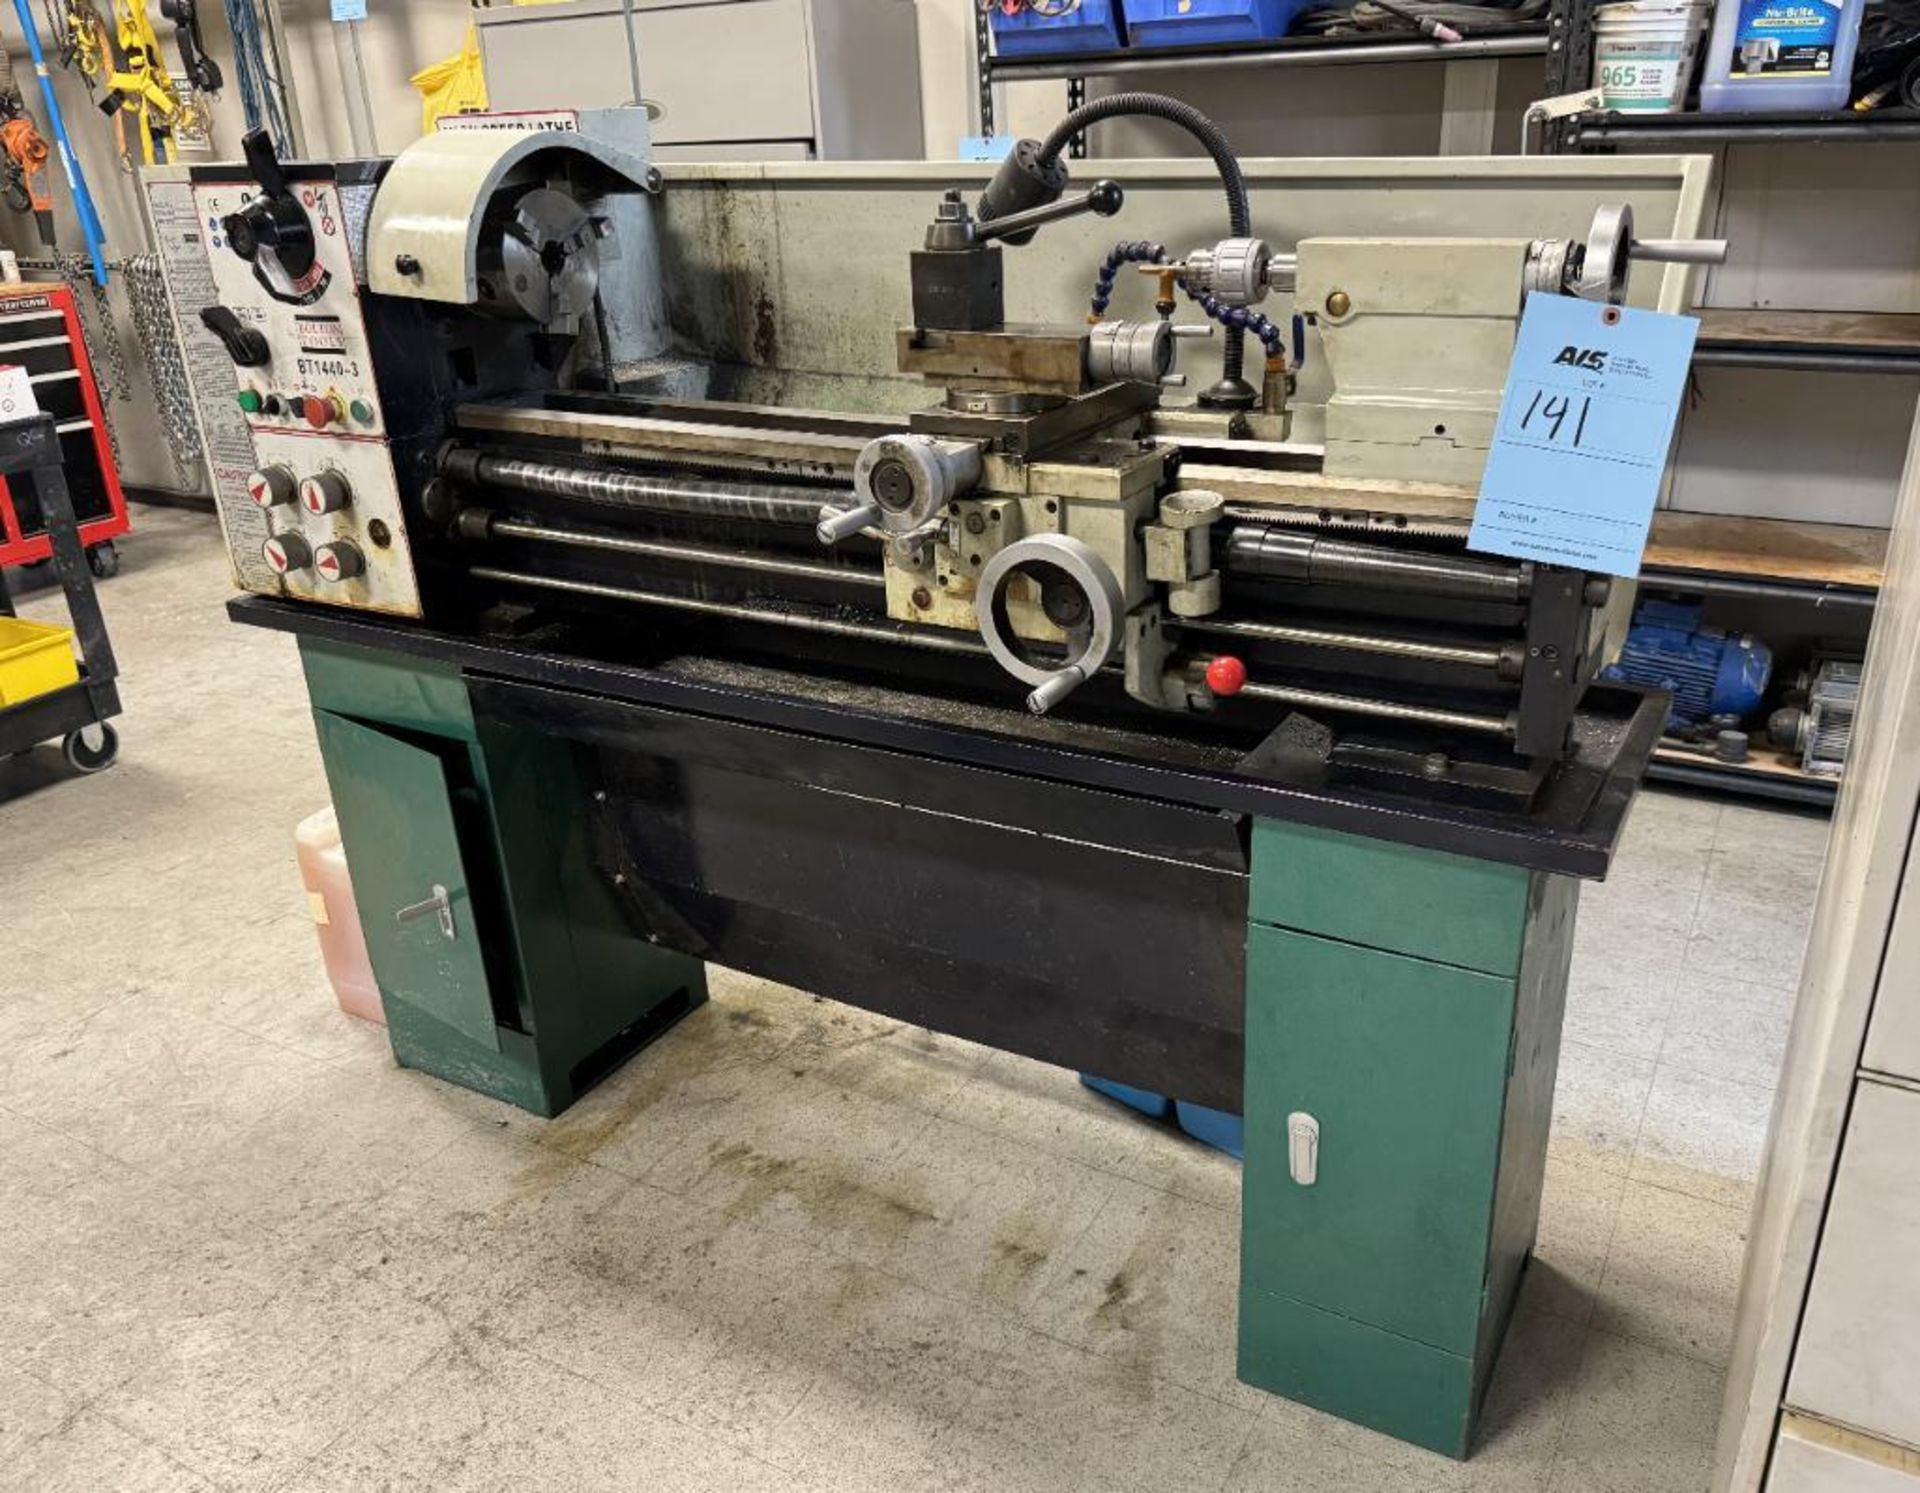 Bolton Tools 14" X 40" Metal Lathe, Model BT1440-3, Serial# 14600168, Built 2014. With misc. tooling